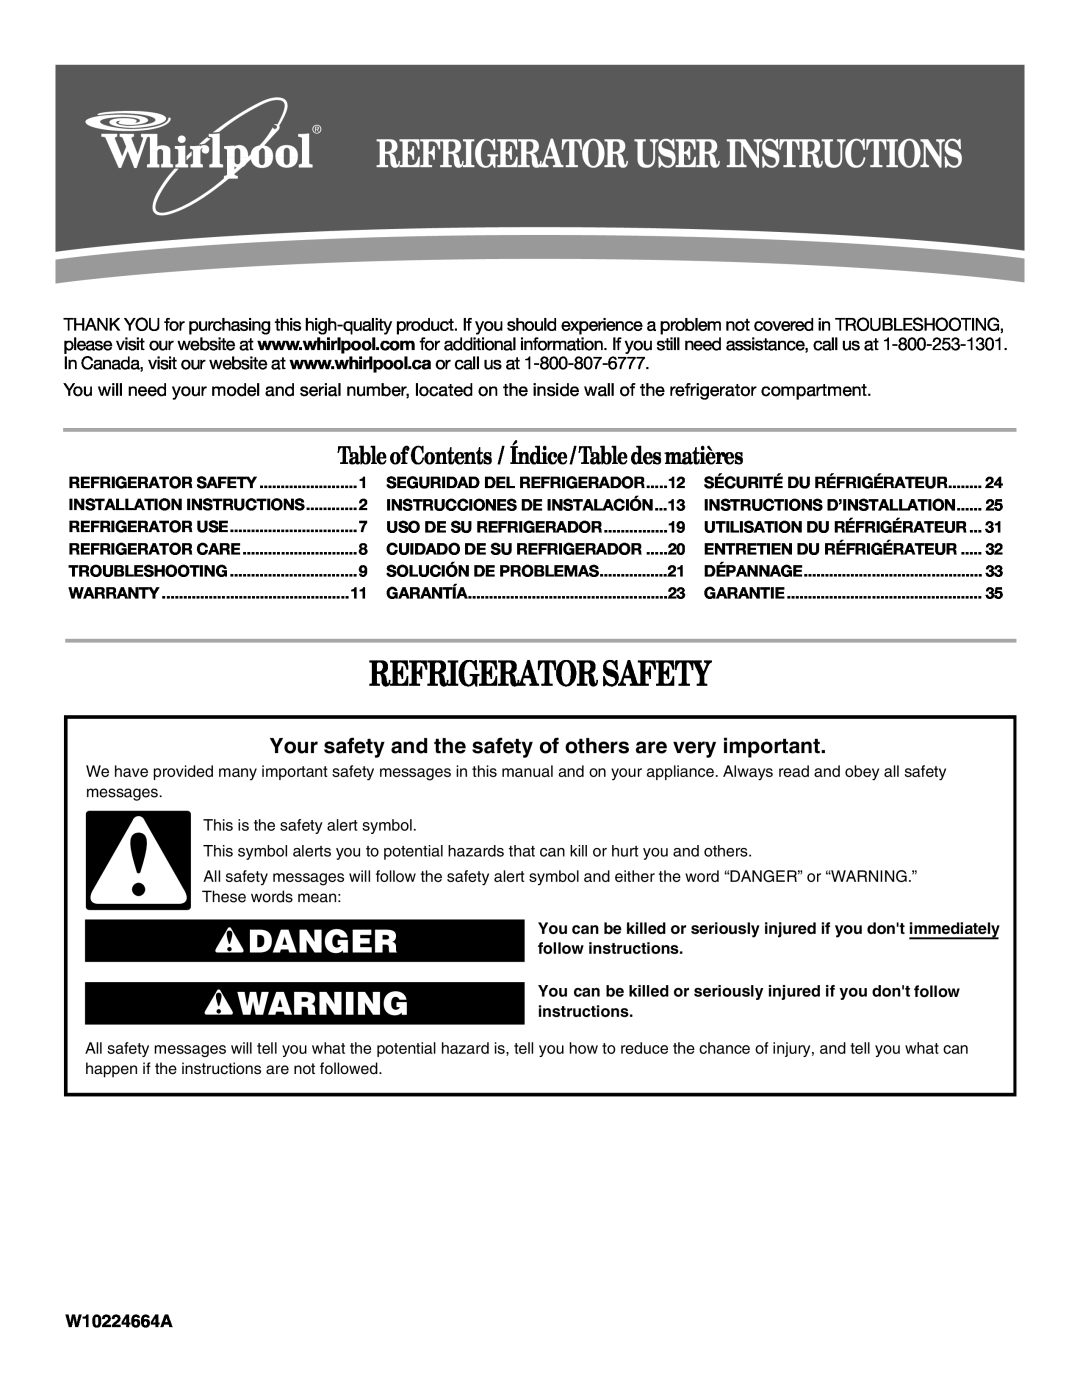 Whirlpool W10224664A installation instructions Refrigerator Safety, Danger, Table ofContents / Índice / Table des matières 